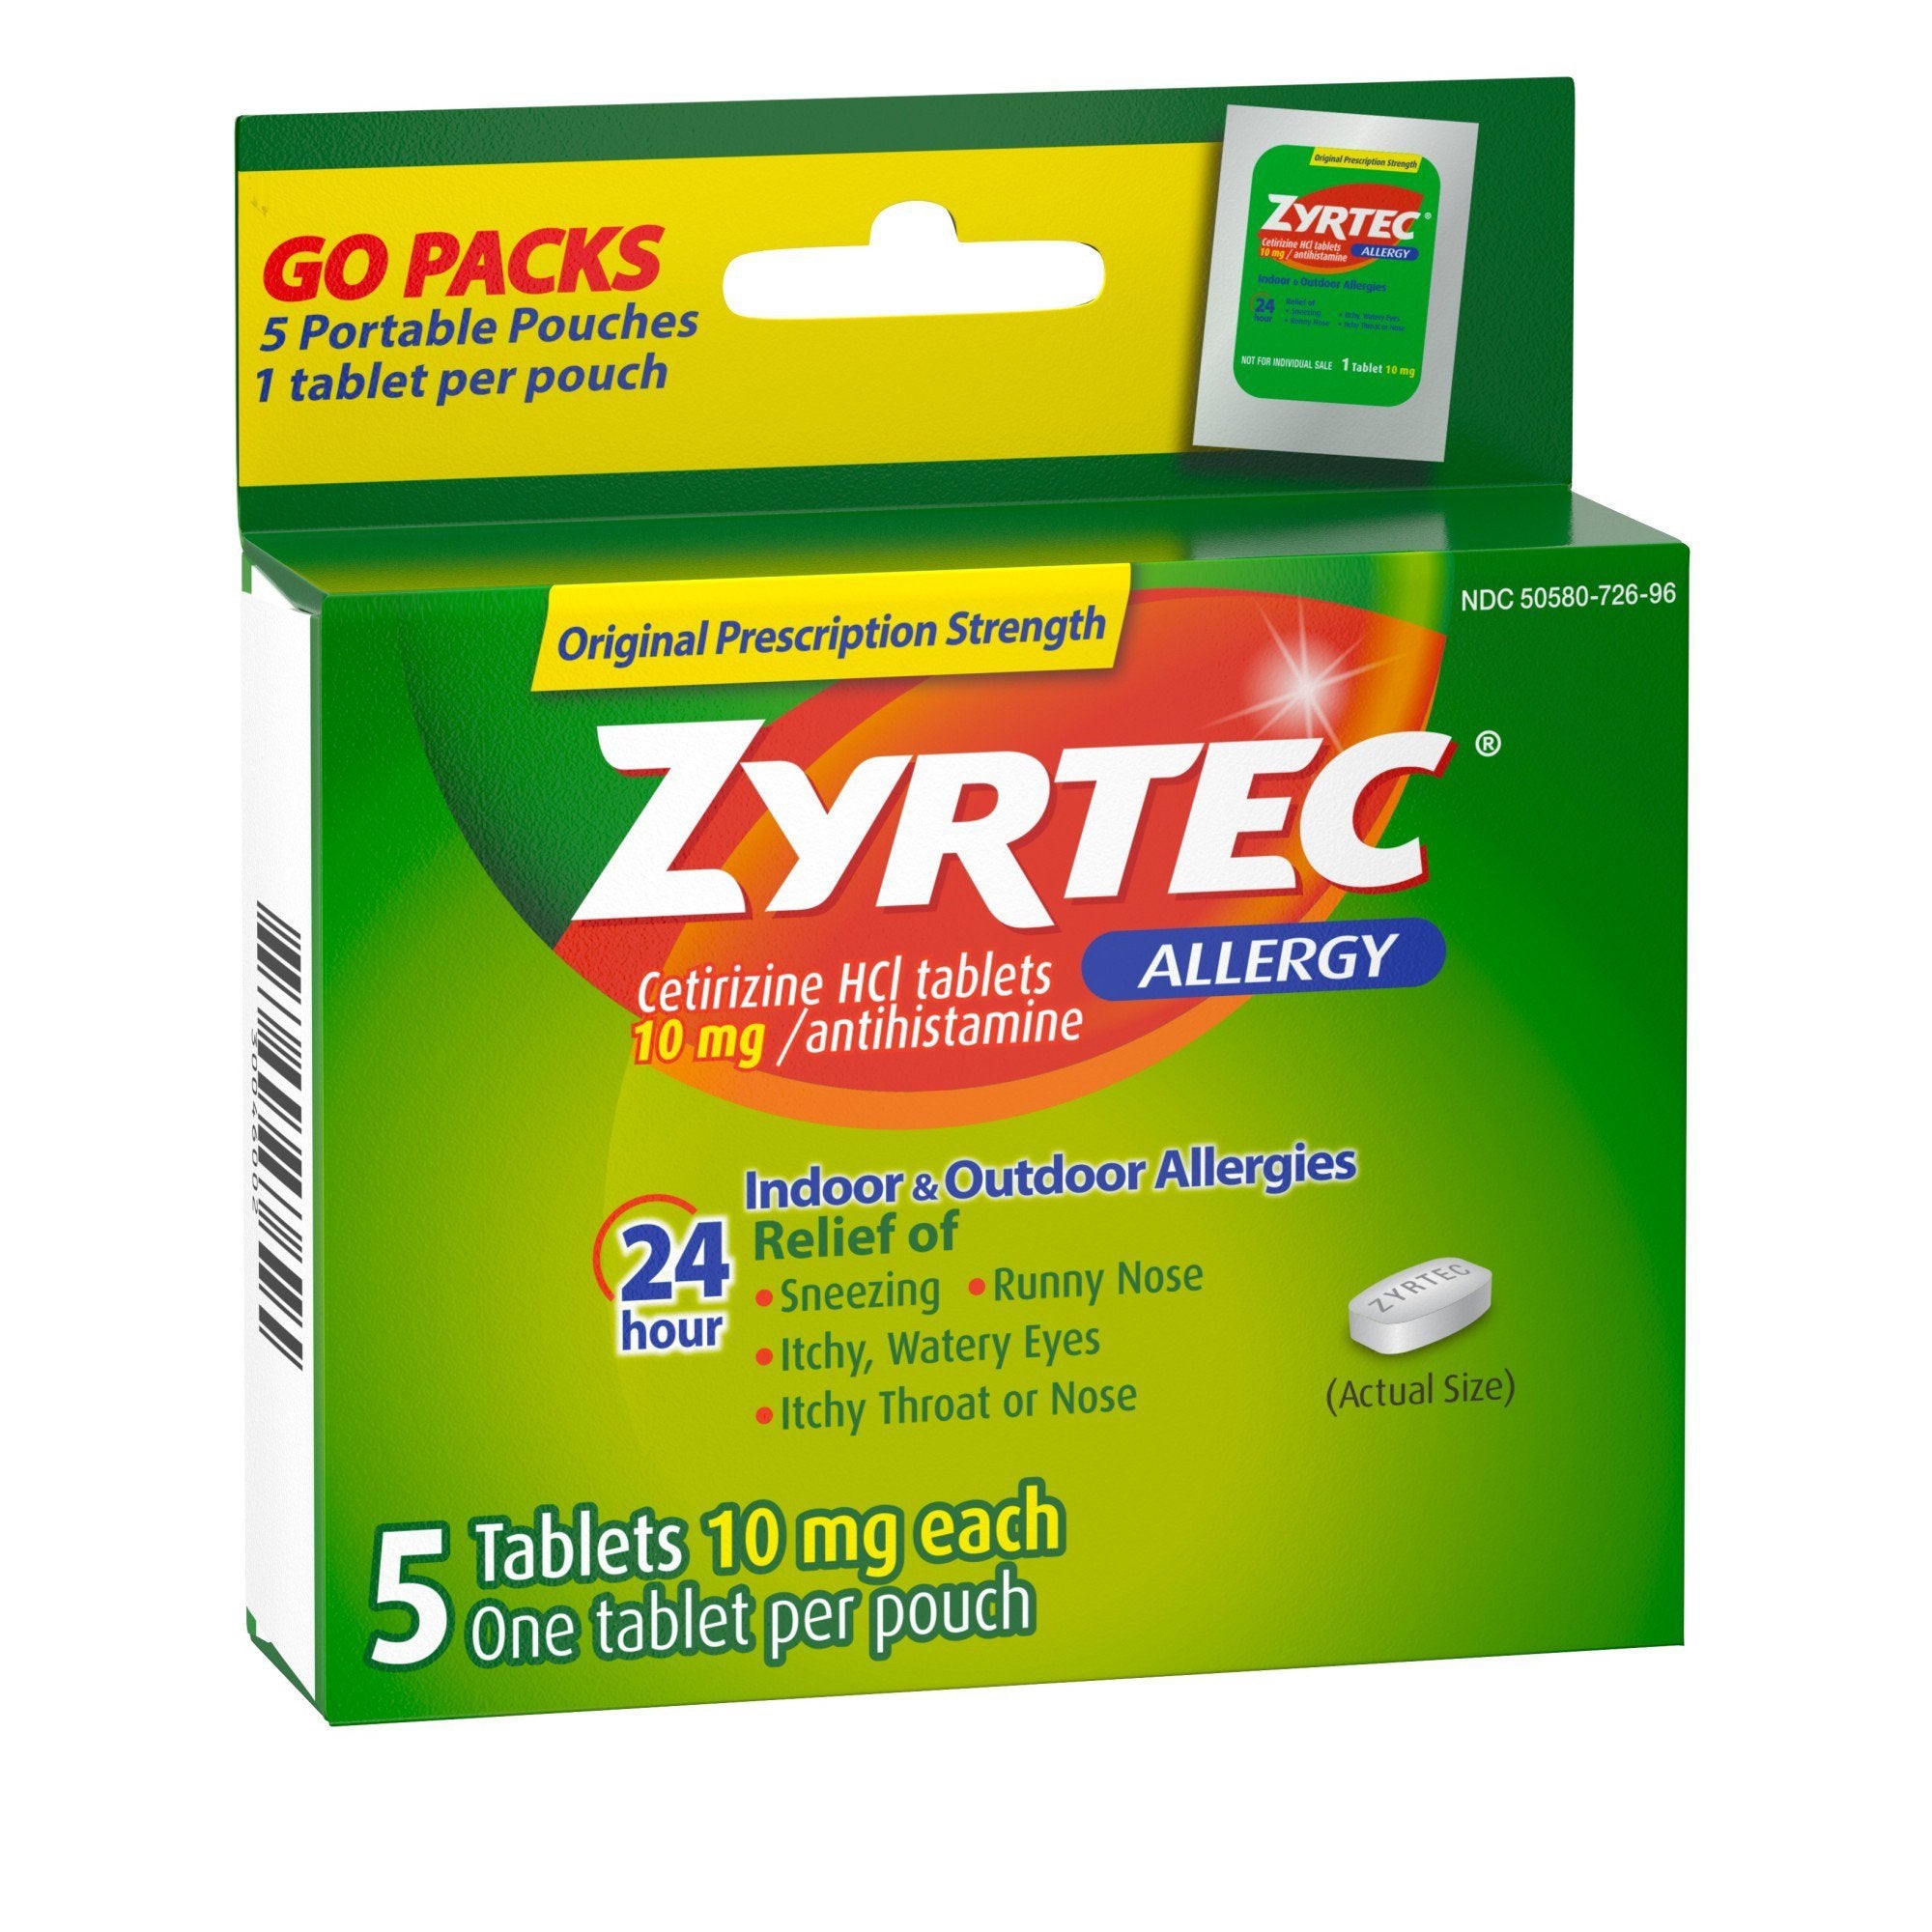 Allergy Relief Zyrtec® 10 mg Strength Tablet 5 per Box